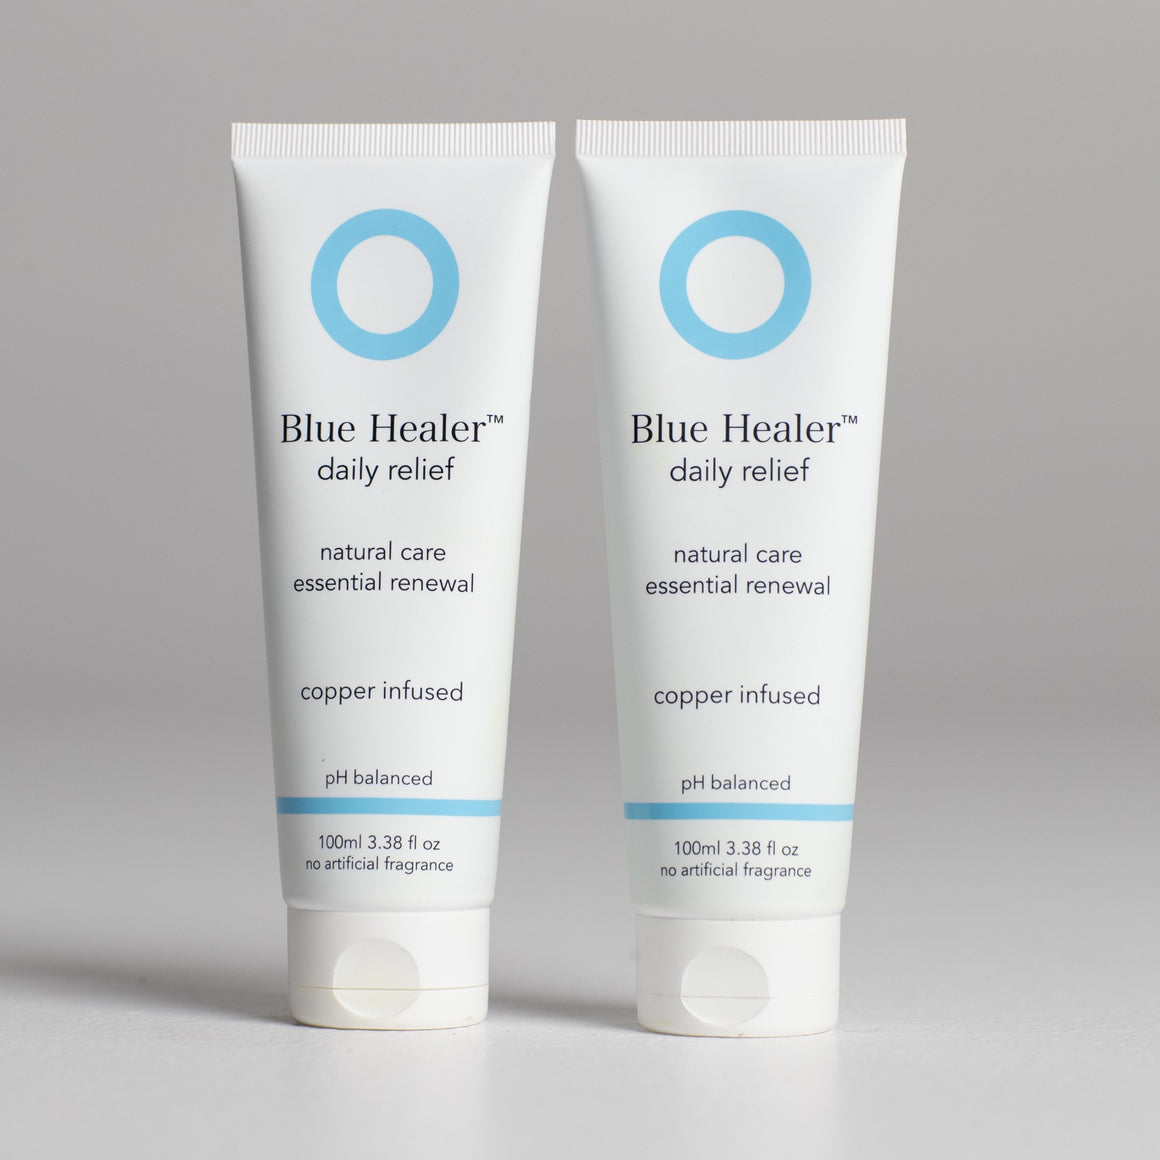 Image is of two tubes of Blue Healer Daily Relief Cream next to each other. The label reads "Blue Healer Daily Relief, natural care, essential renewal and copper infused. pH balanced with no artificial fragrance. 100ml, 3.38 fluid ounces".